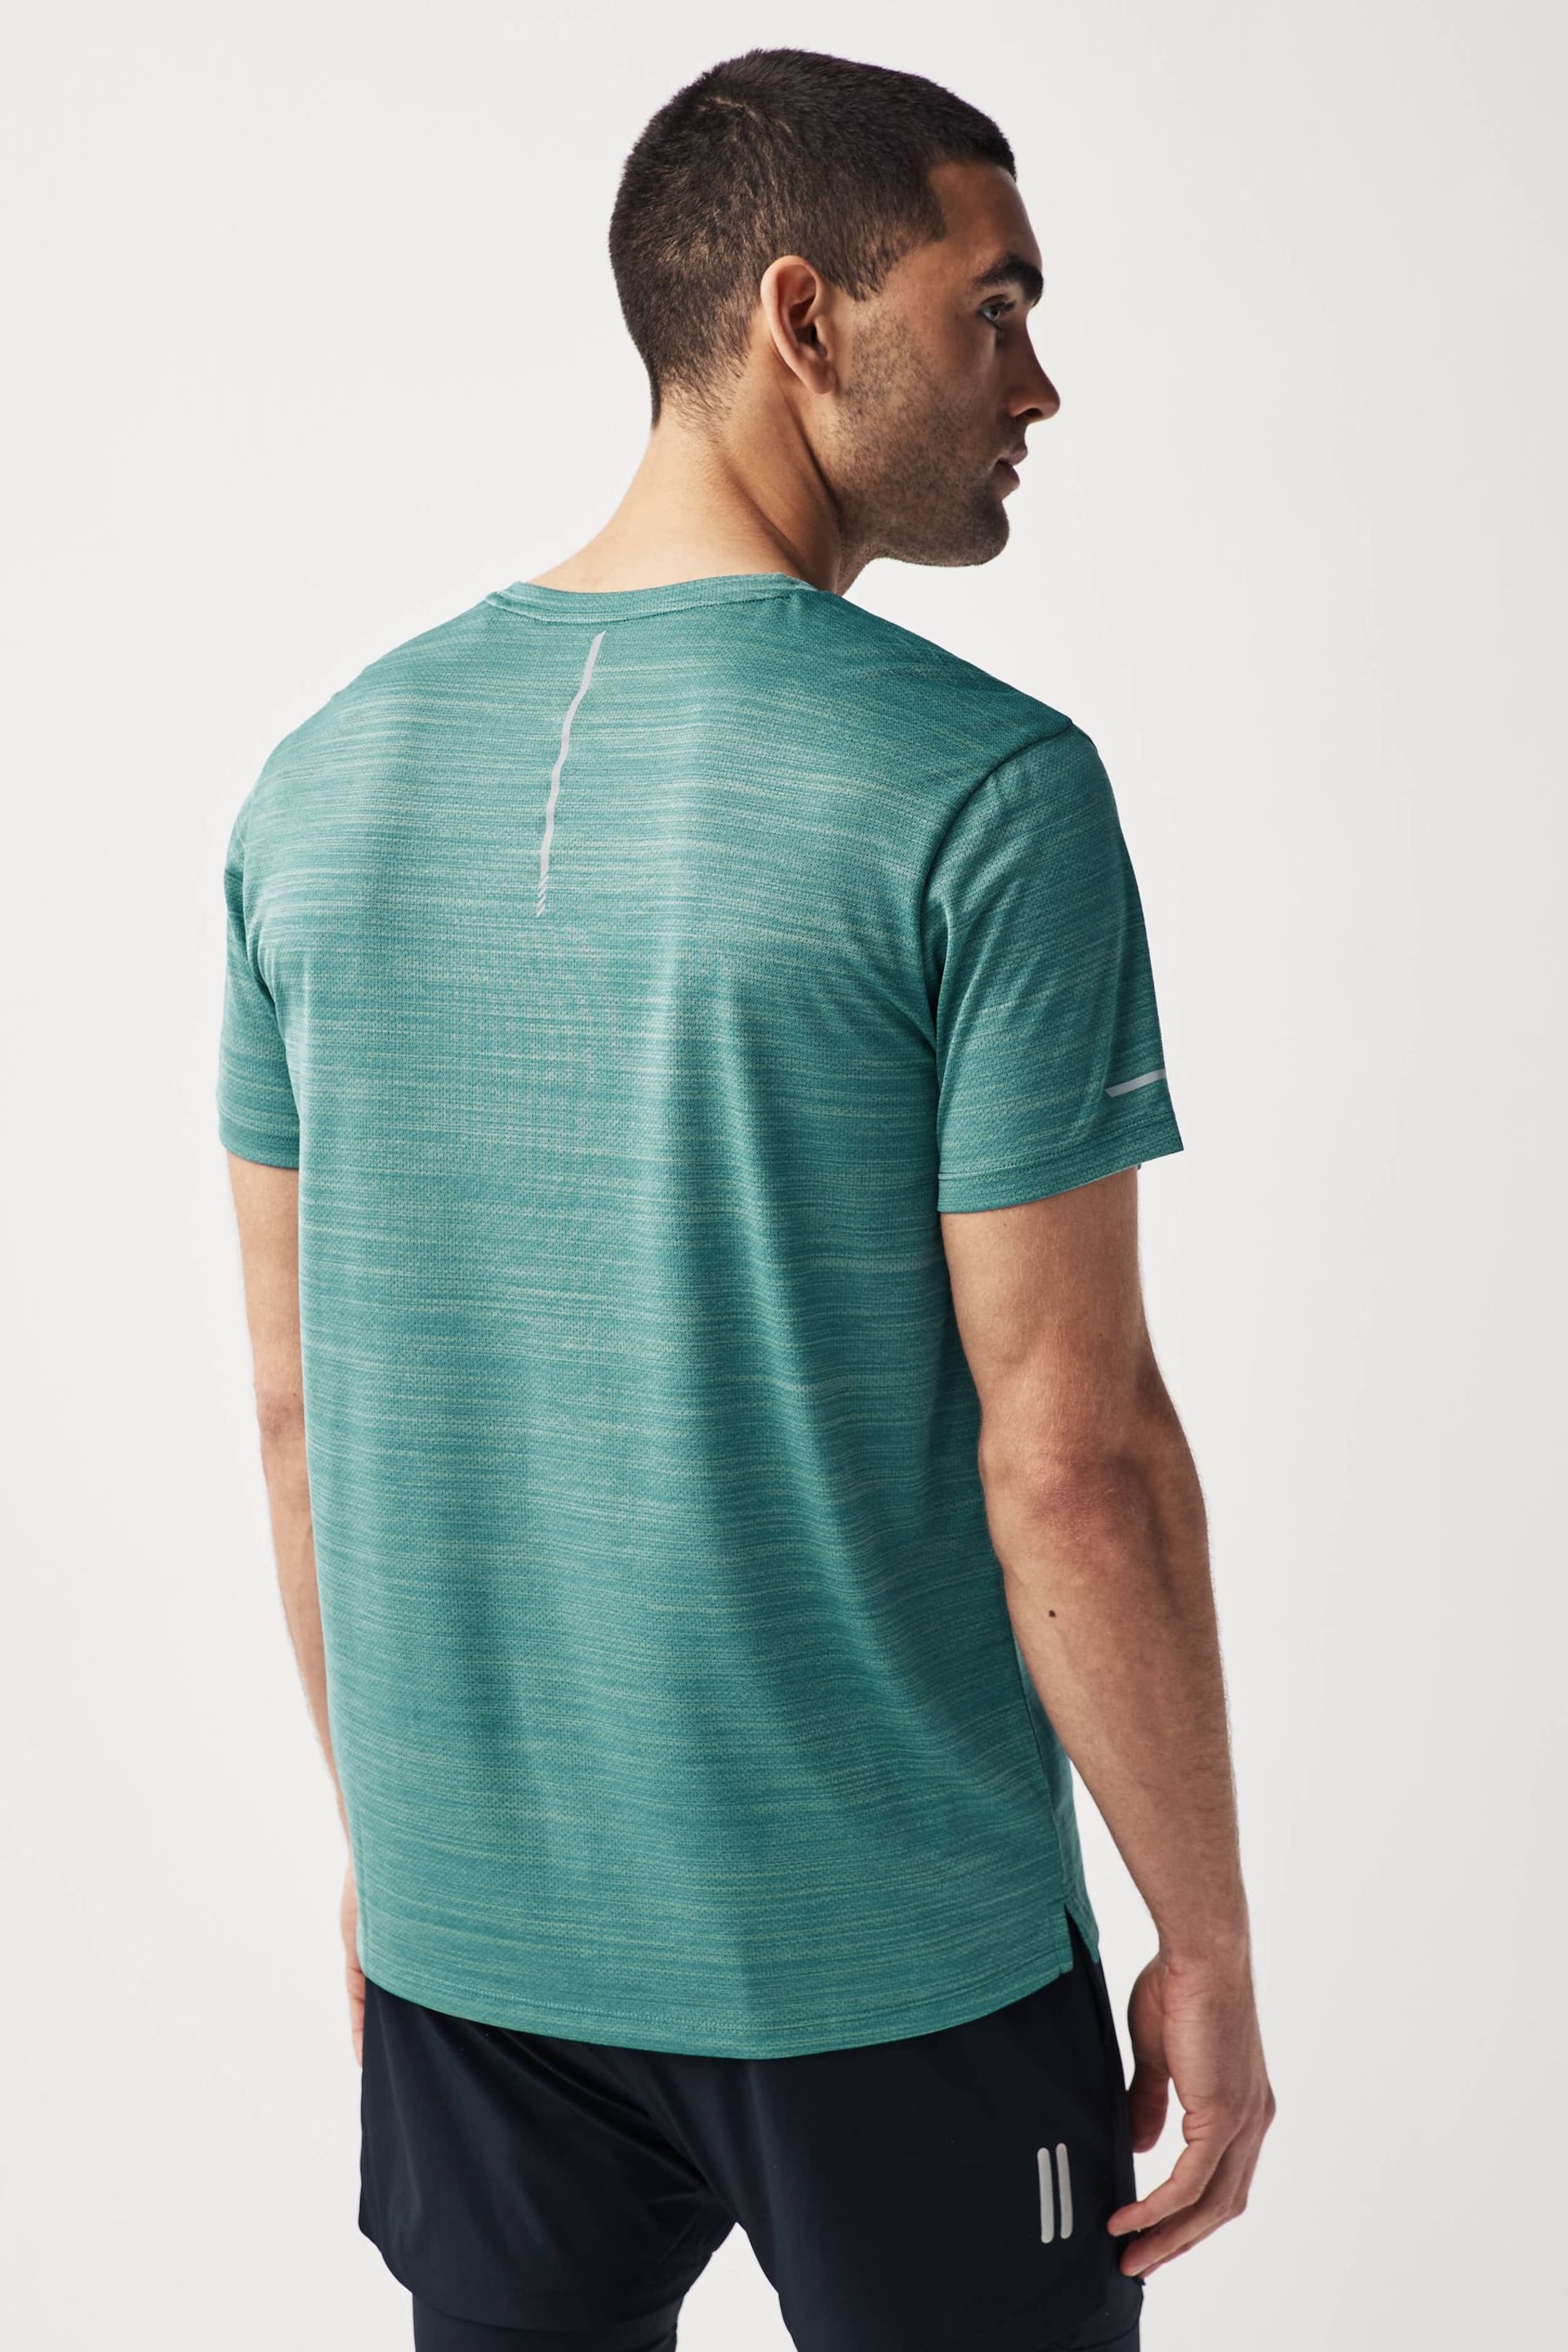 Teal Blue Active Mesh Training T-Shirt - Image 4 of 8